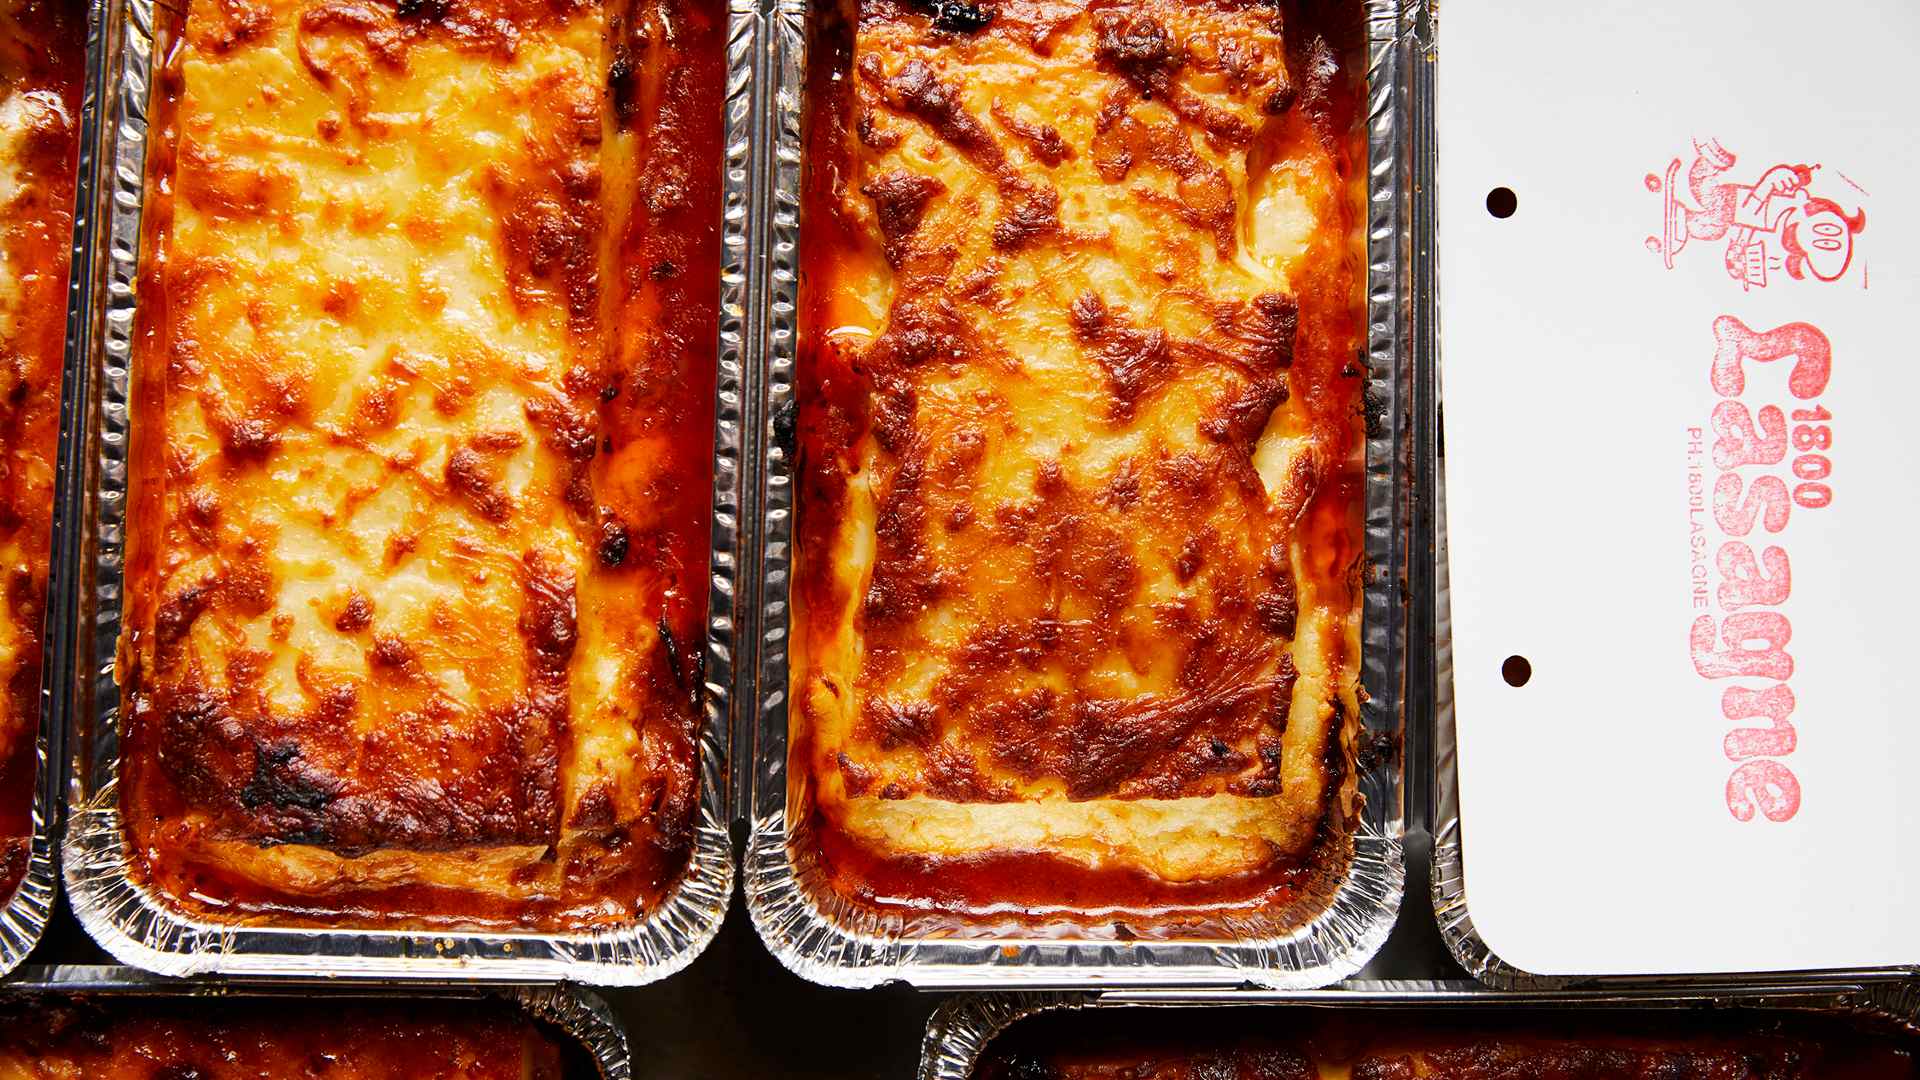 1800 Lasagne Is Offering Limited-Edition Lube and Lasagne Lockdown Packs This Weekend